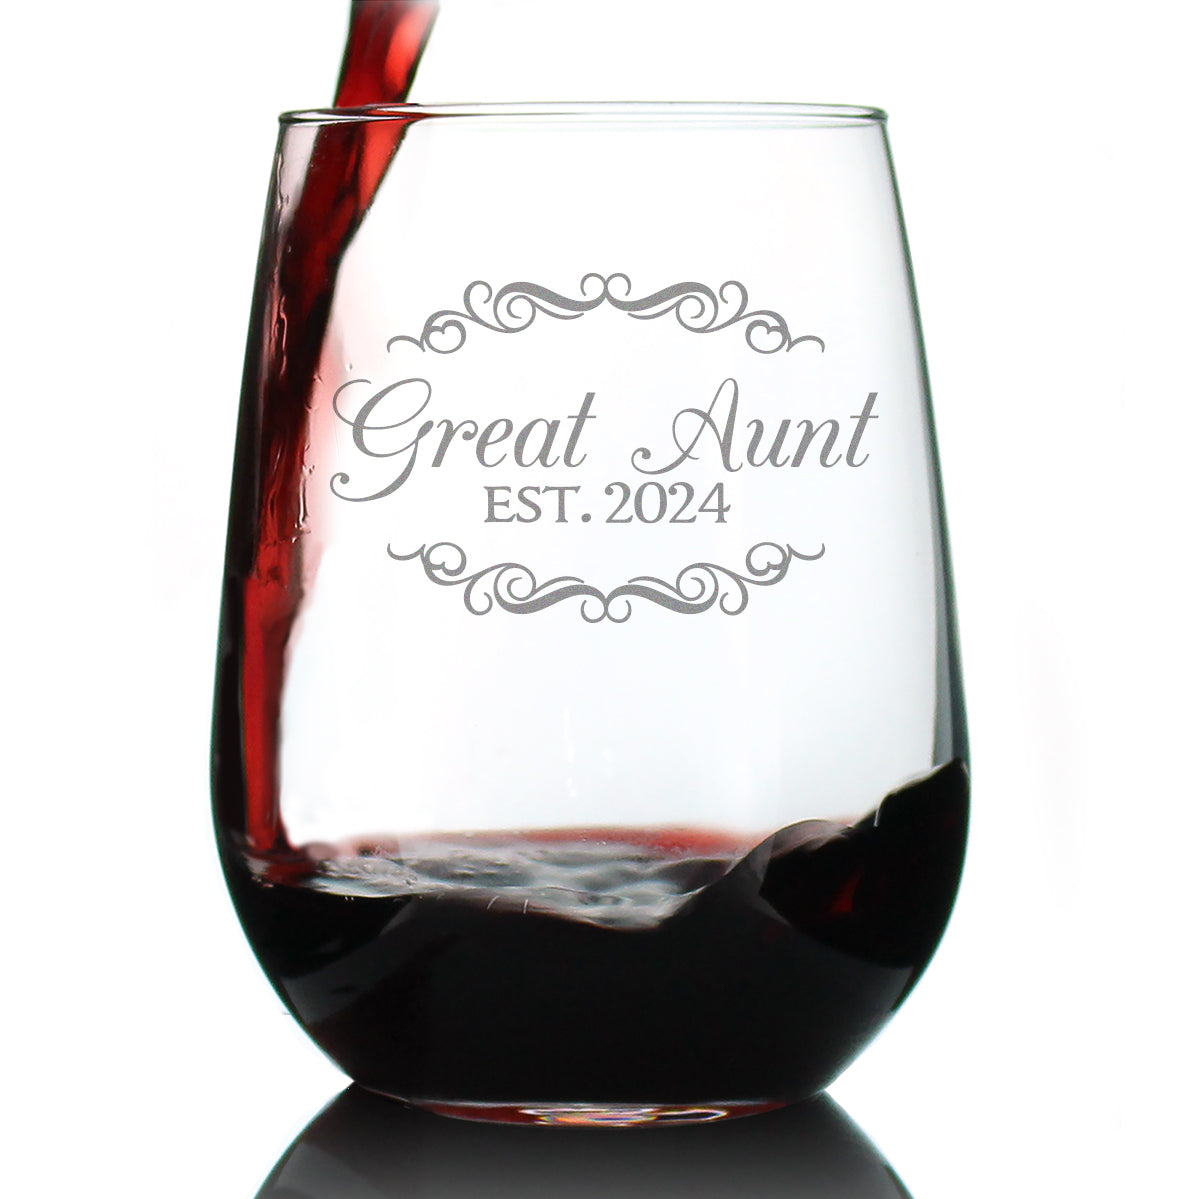 Great Aunt Est 2024 - New Great Aunts Stemless Wine Glass Gift for First Time Great Aunts - Decorative 17 Oz Large Glasses